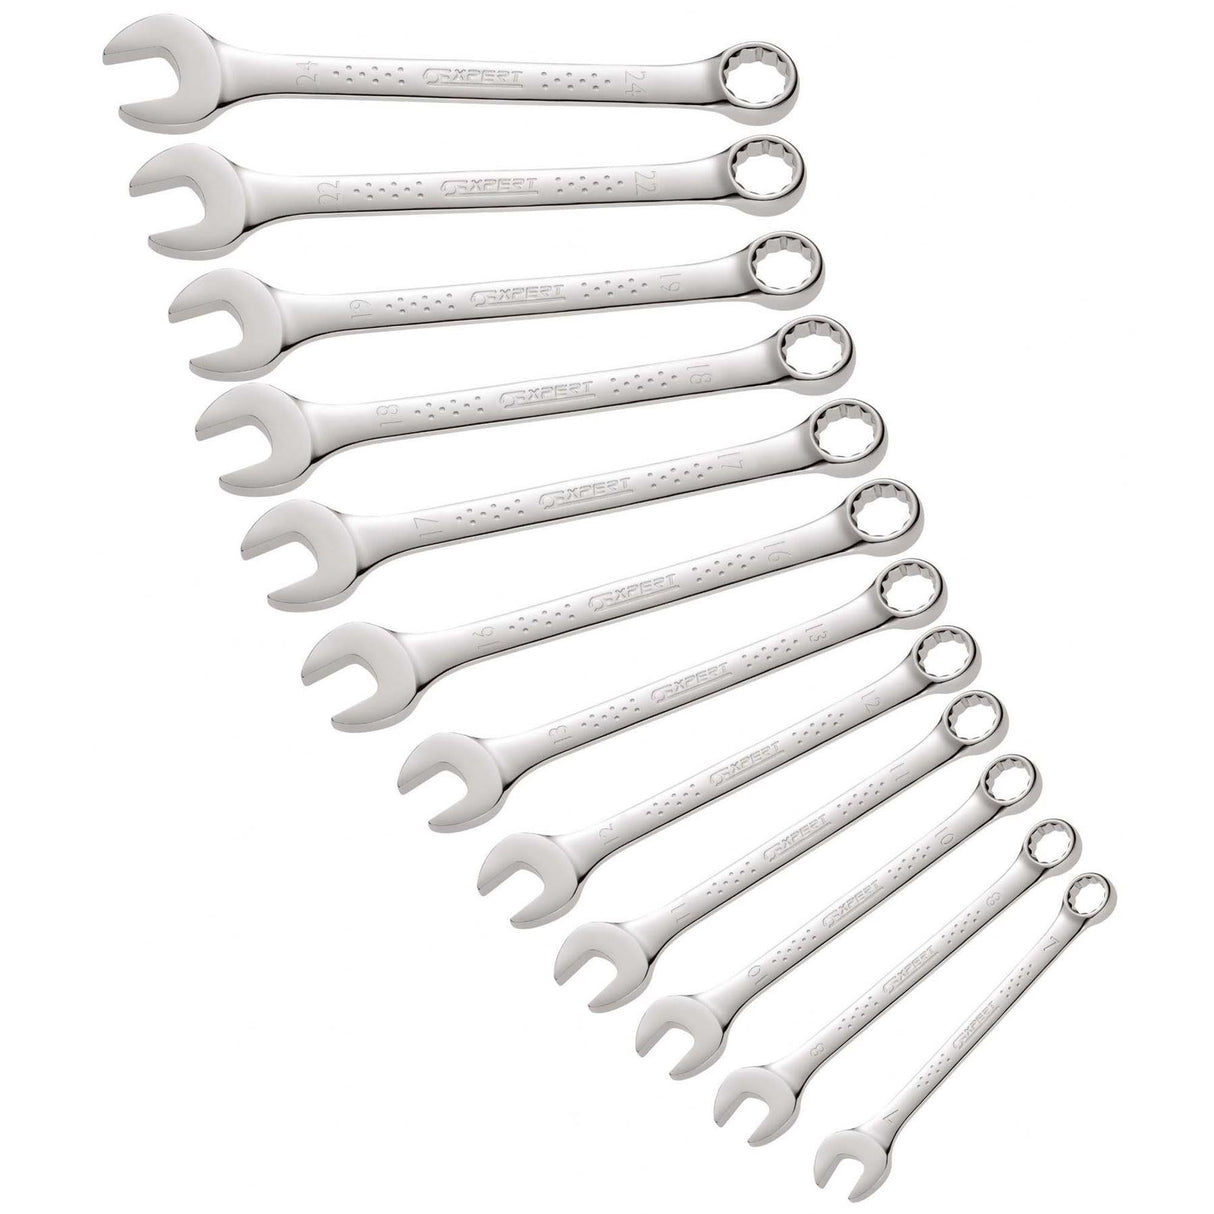 Expert by Facom 16 Pcs Metric Combination Wrench Set E113238B